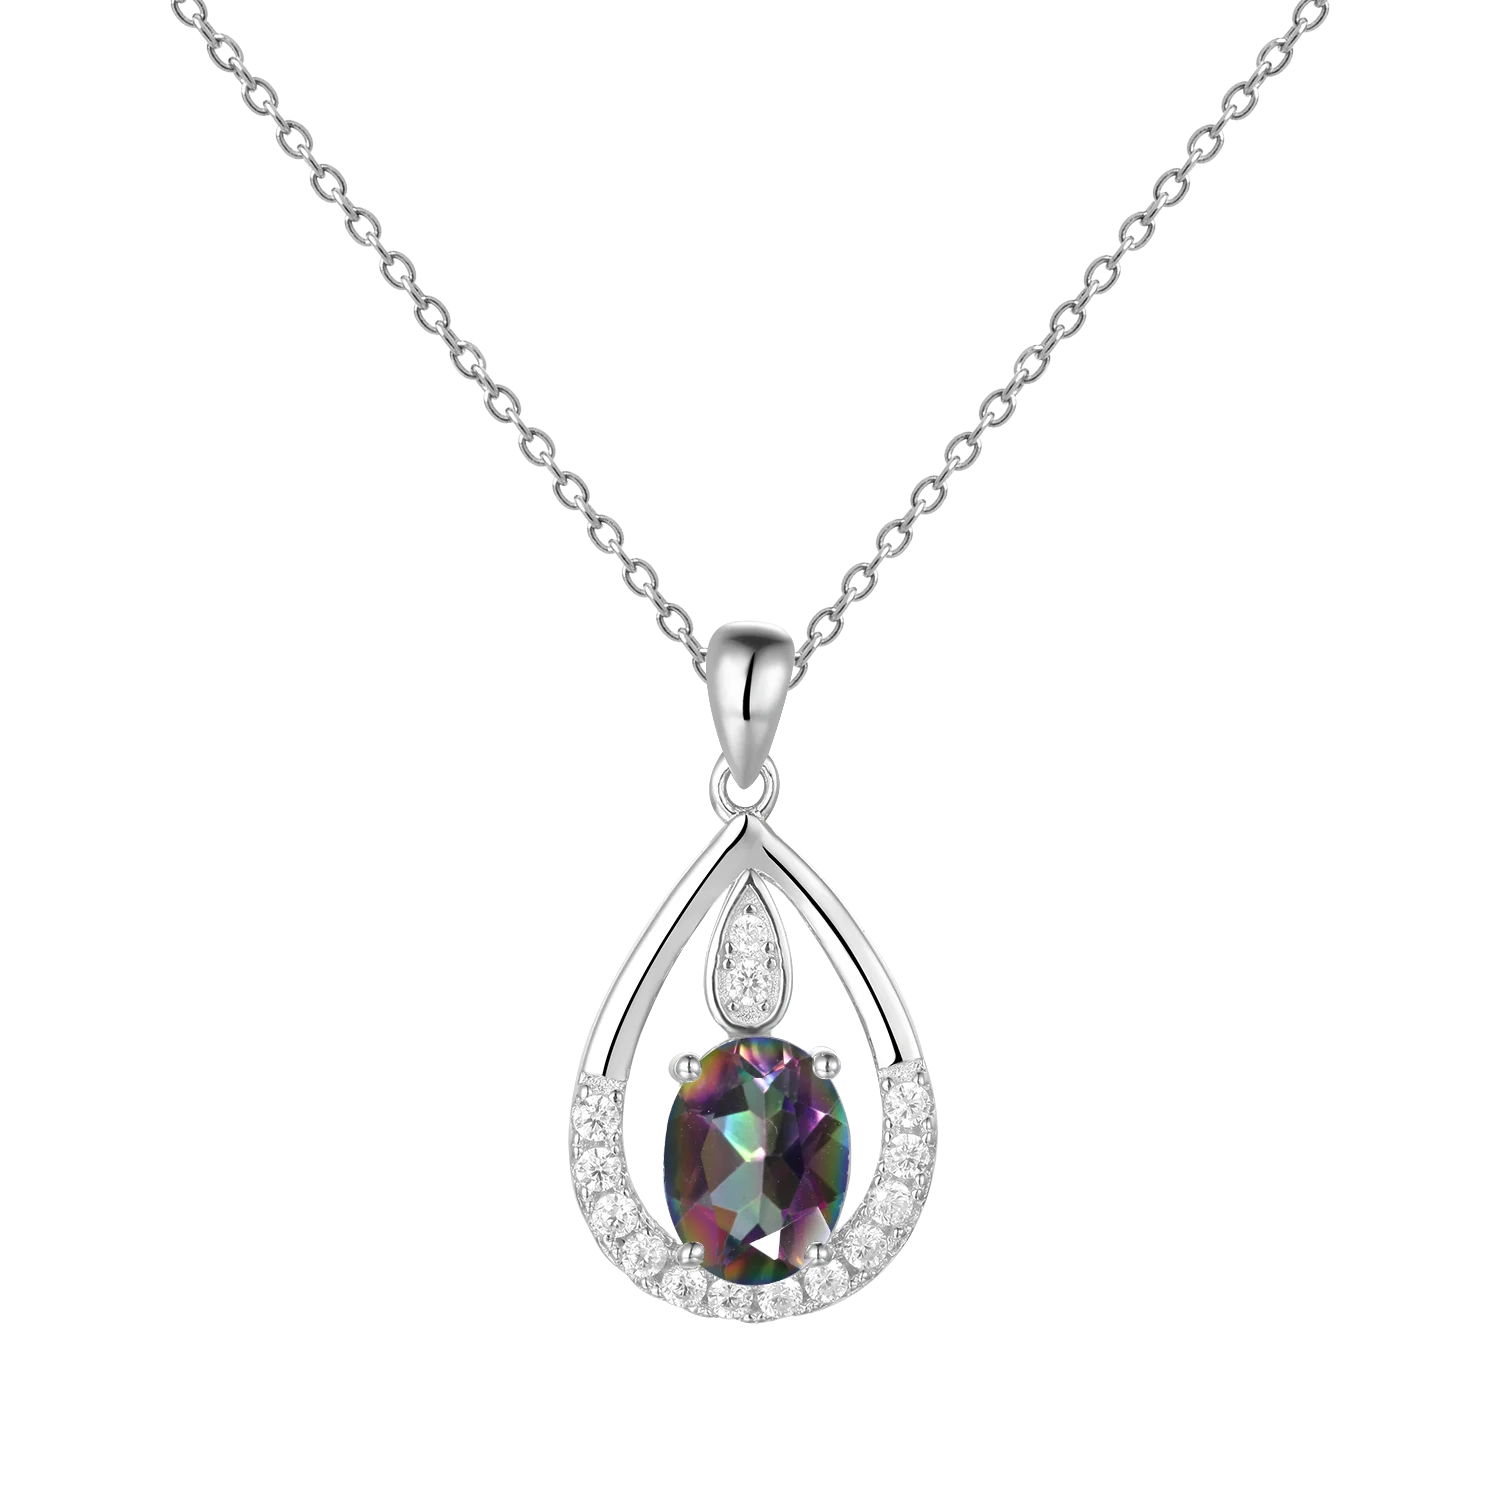 Gem's Ballet December Birthstone Topaz Necklace 6x8mm Oval Pink Topaz Pendant Necklace in 925 Sterling Silver with 18" Chain Rainbow